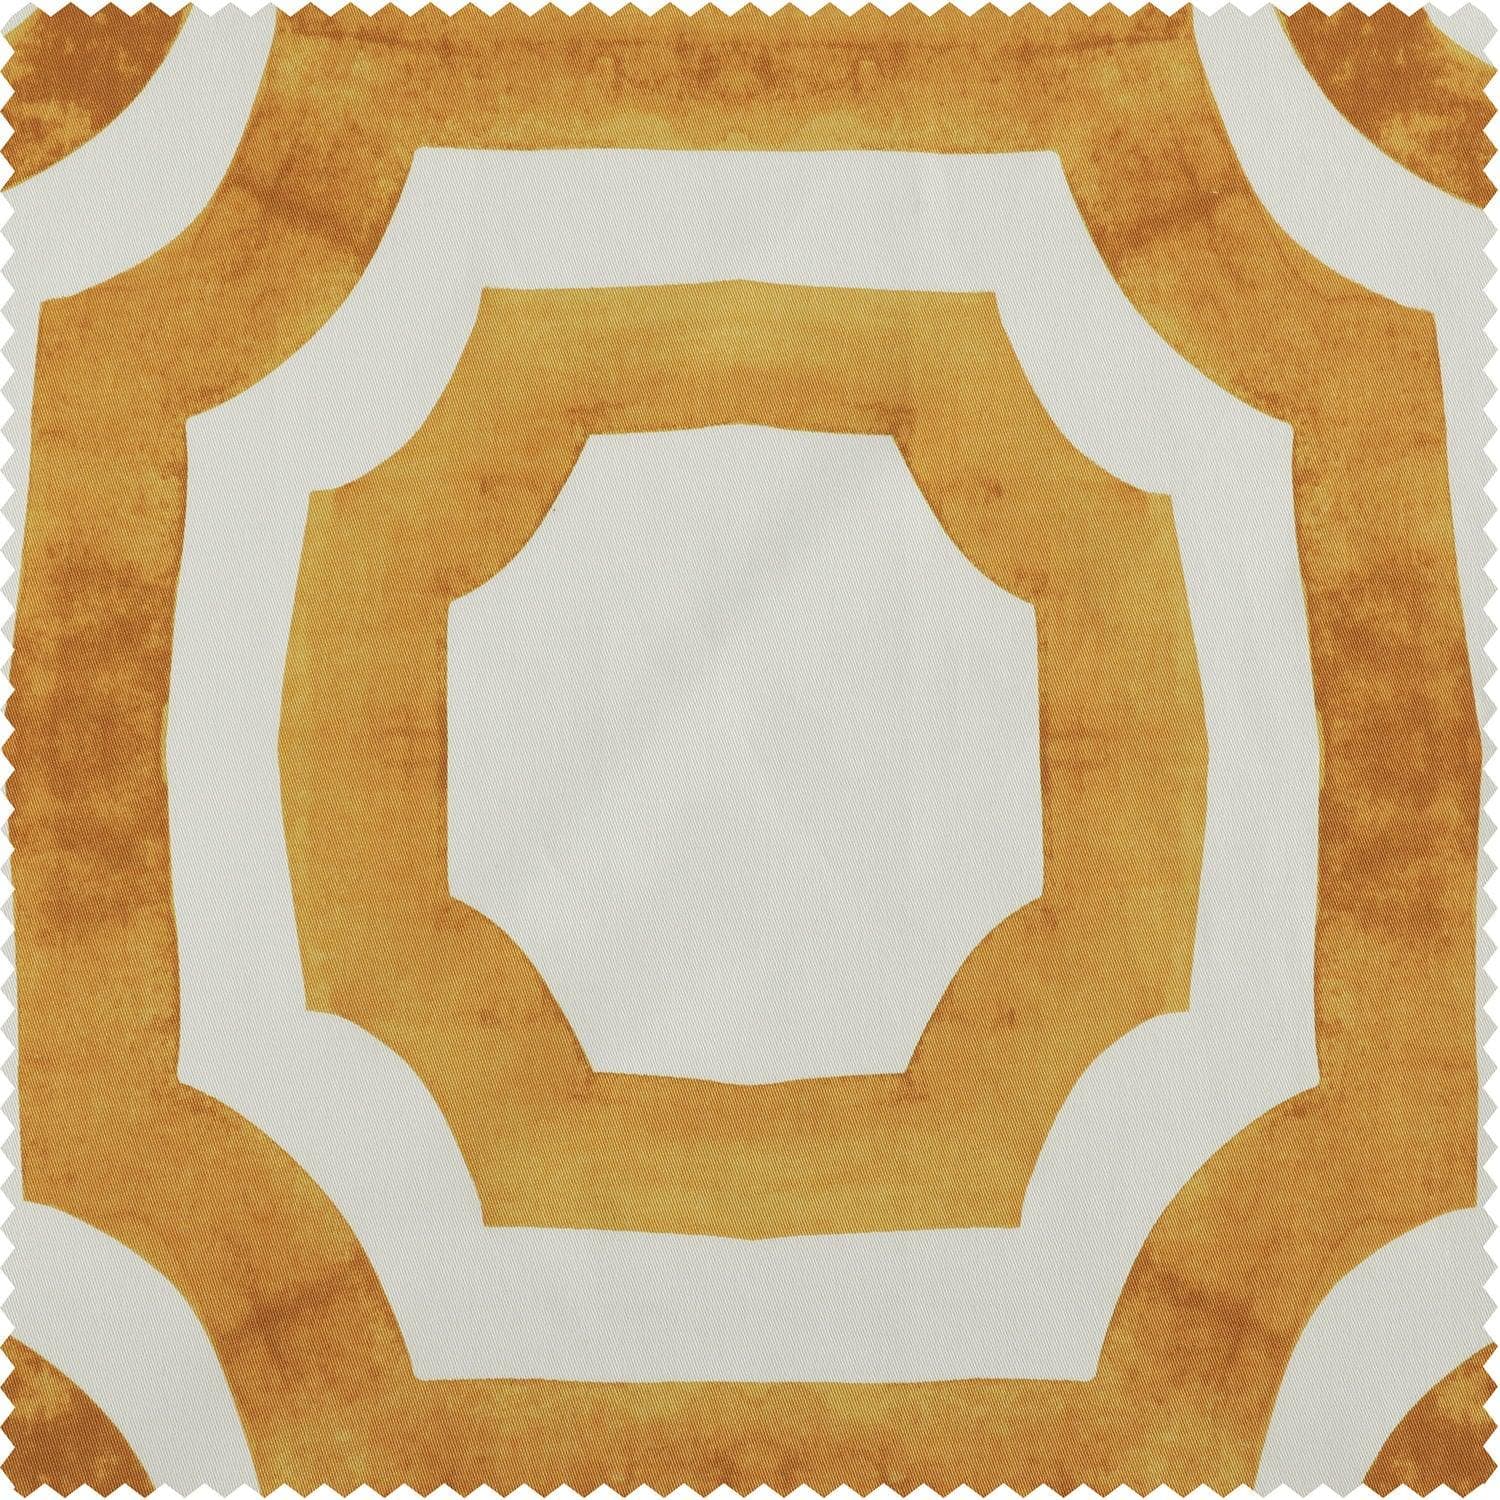 Mecca Gold Printed Cotton Swatch